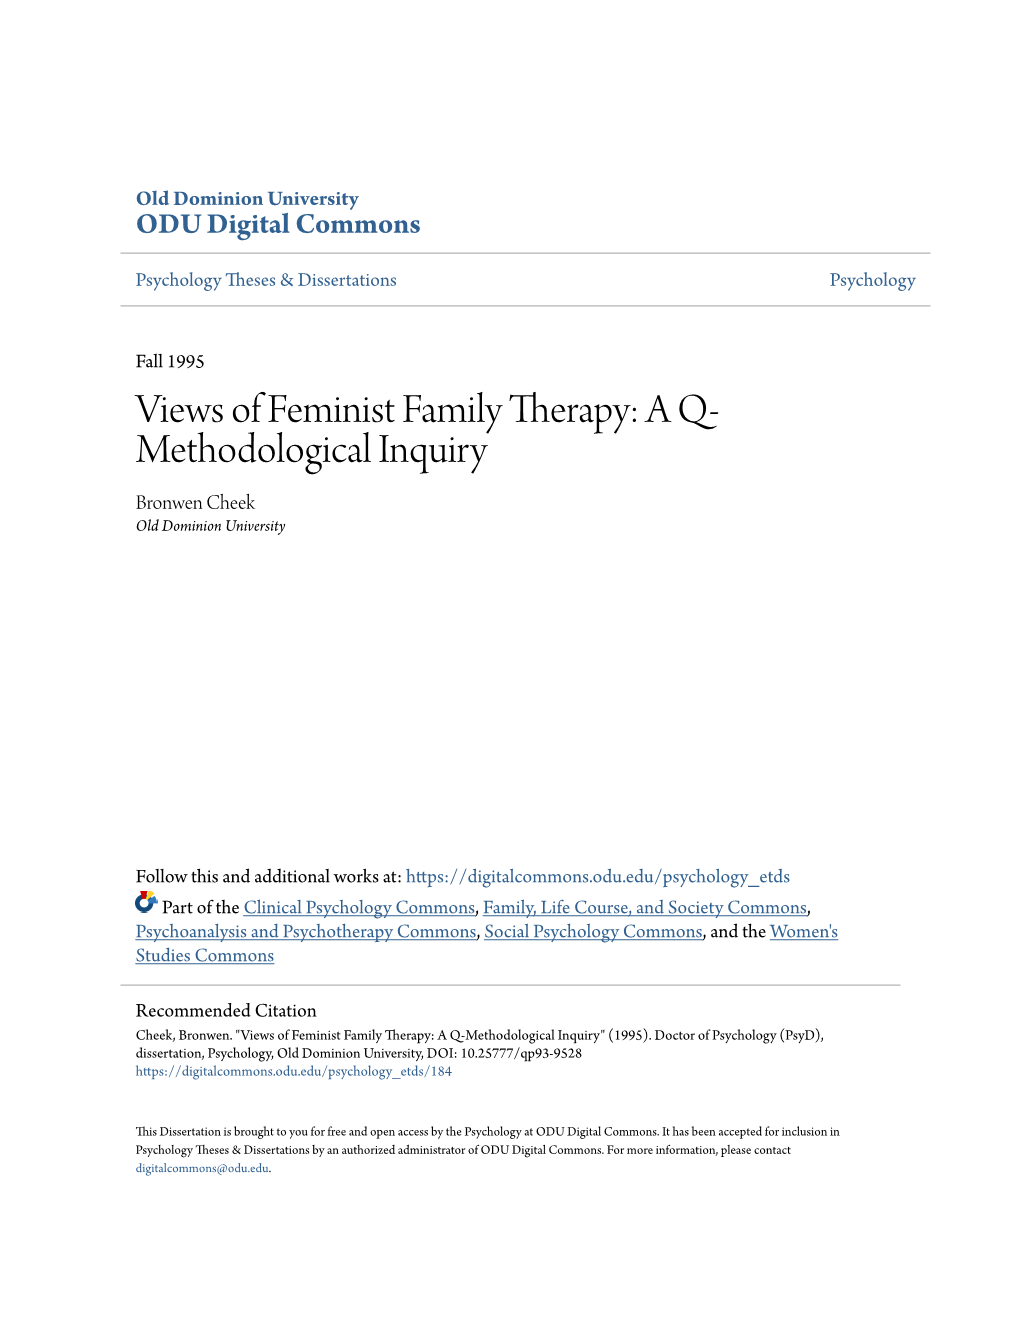 Views of Feminist Family Therapy: a Q- Methodological Inquiry Bronwen Cheek Old Dominion University